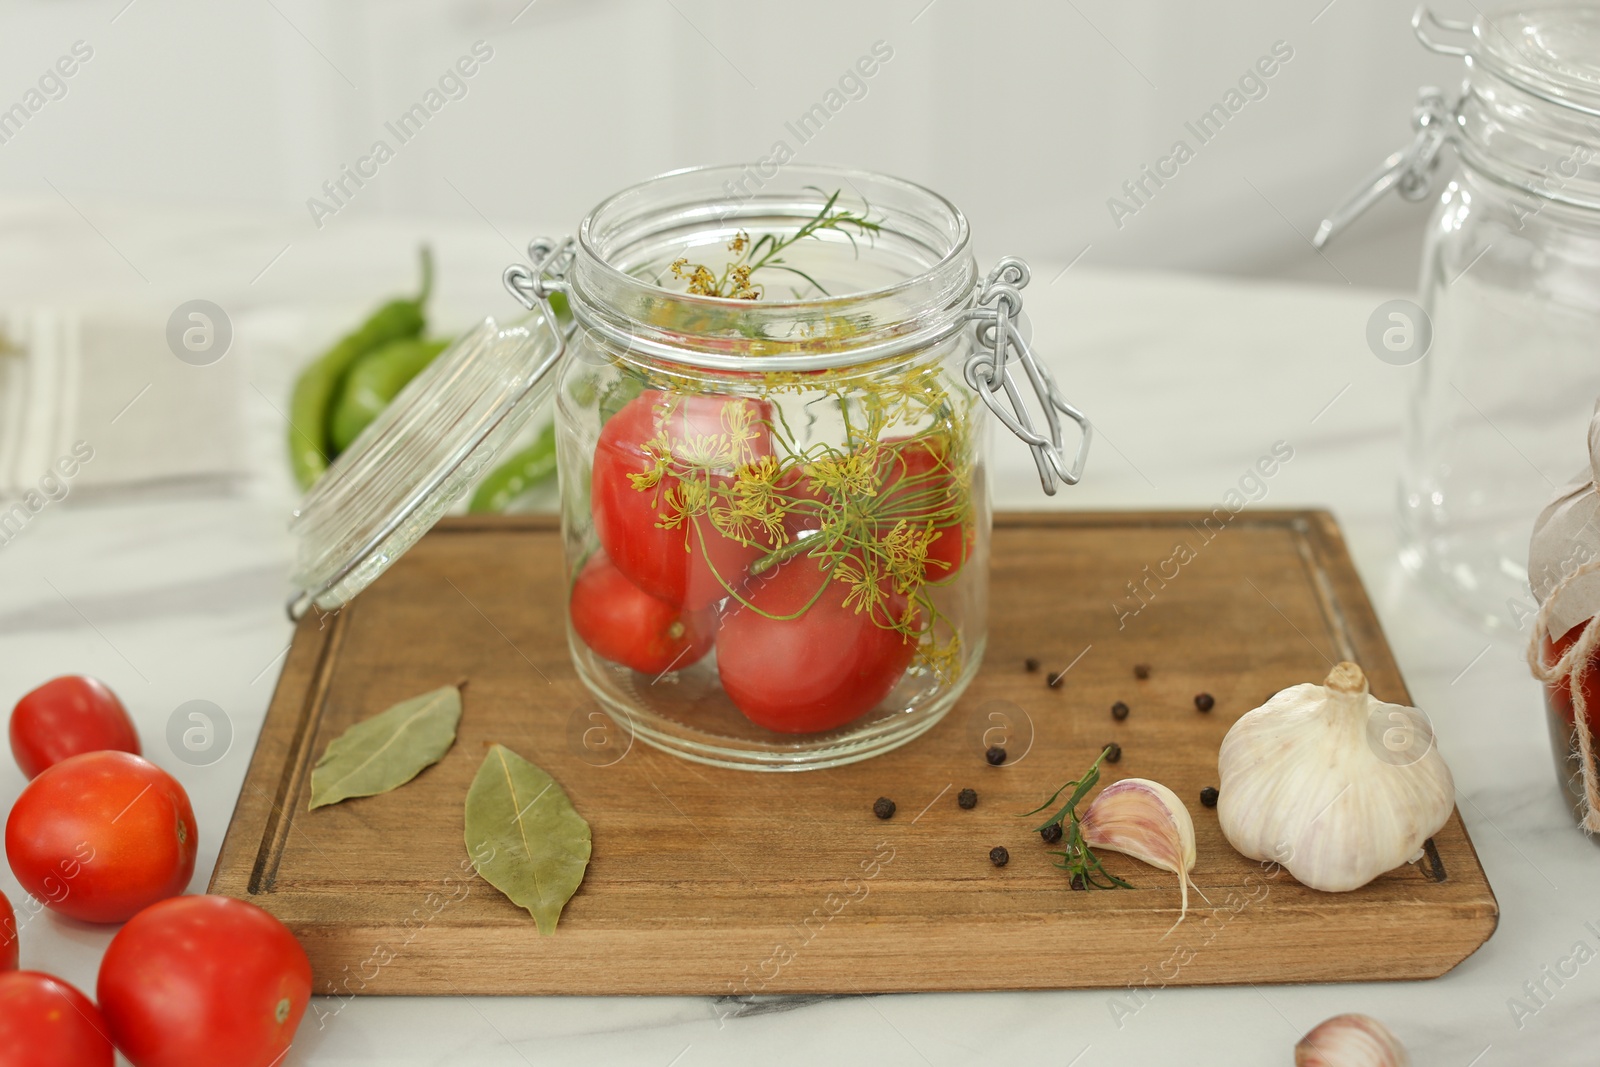 Photo of Tomatoes and dill in pickling jar on kitchen table